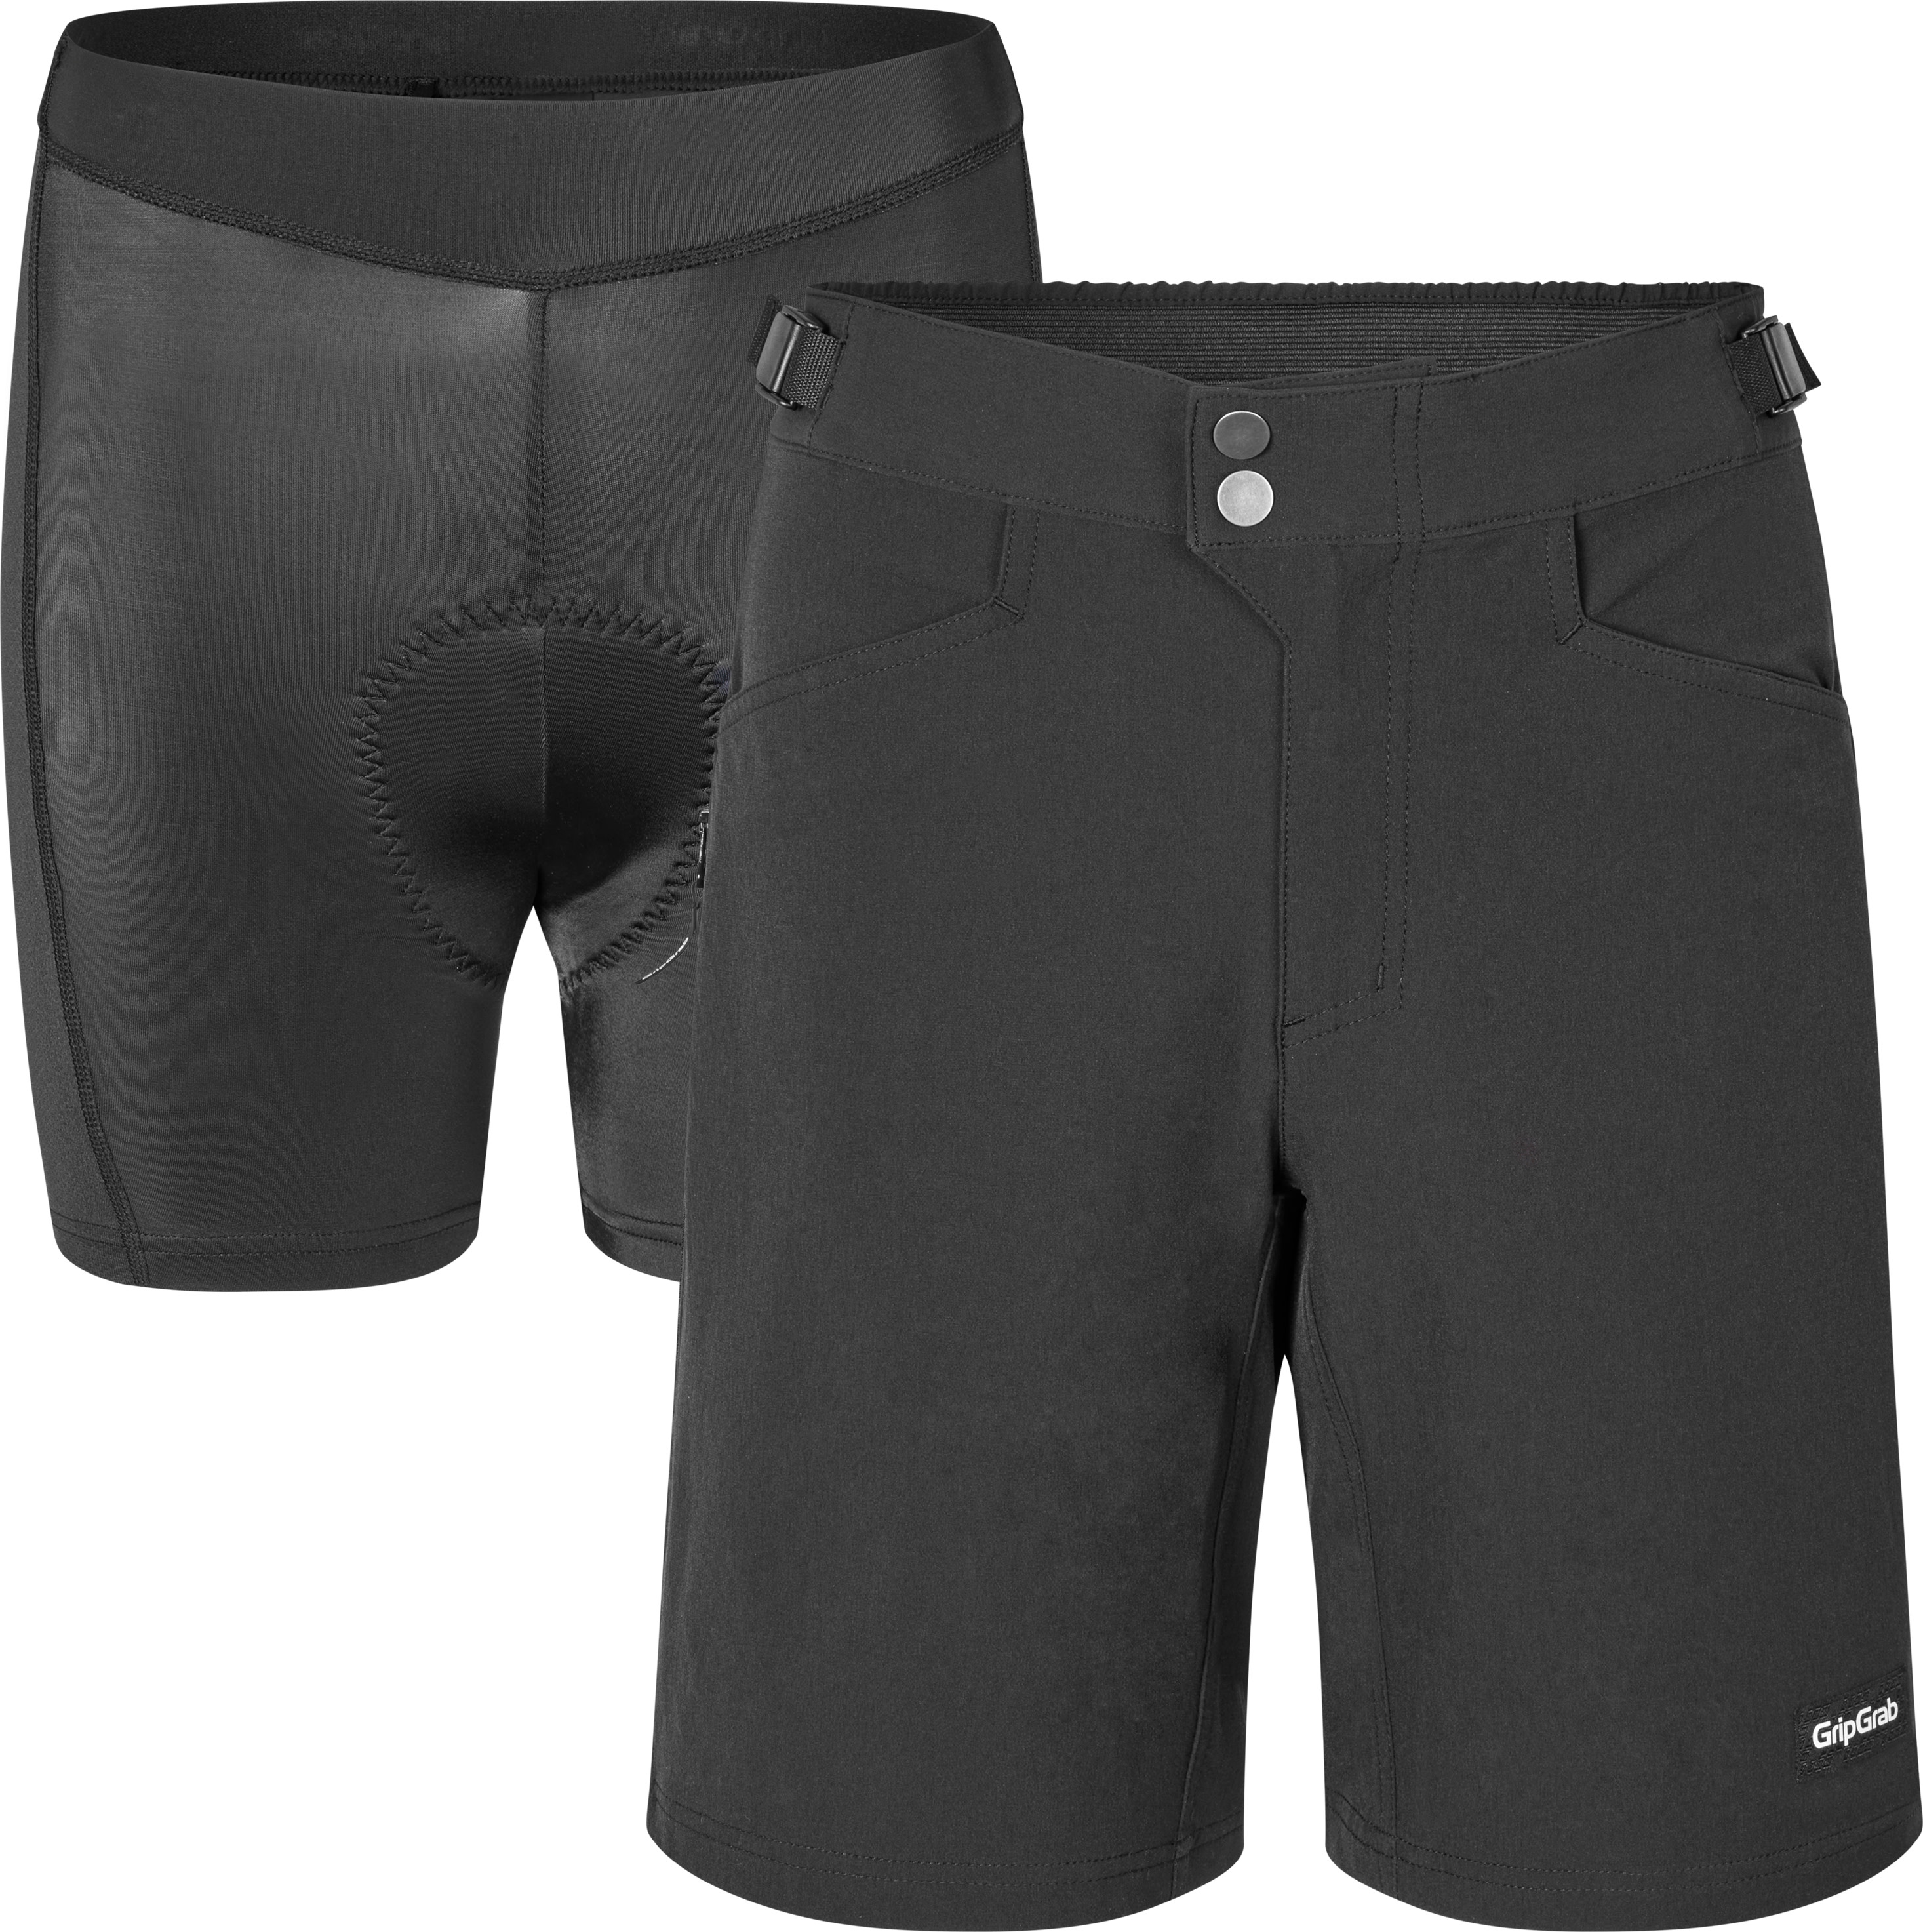 Gripgrab Women’s Flow 2in1 Technical Cycling Shorts Black